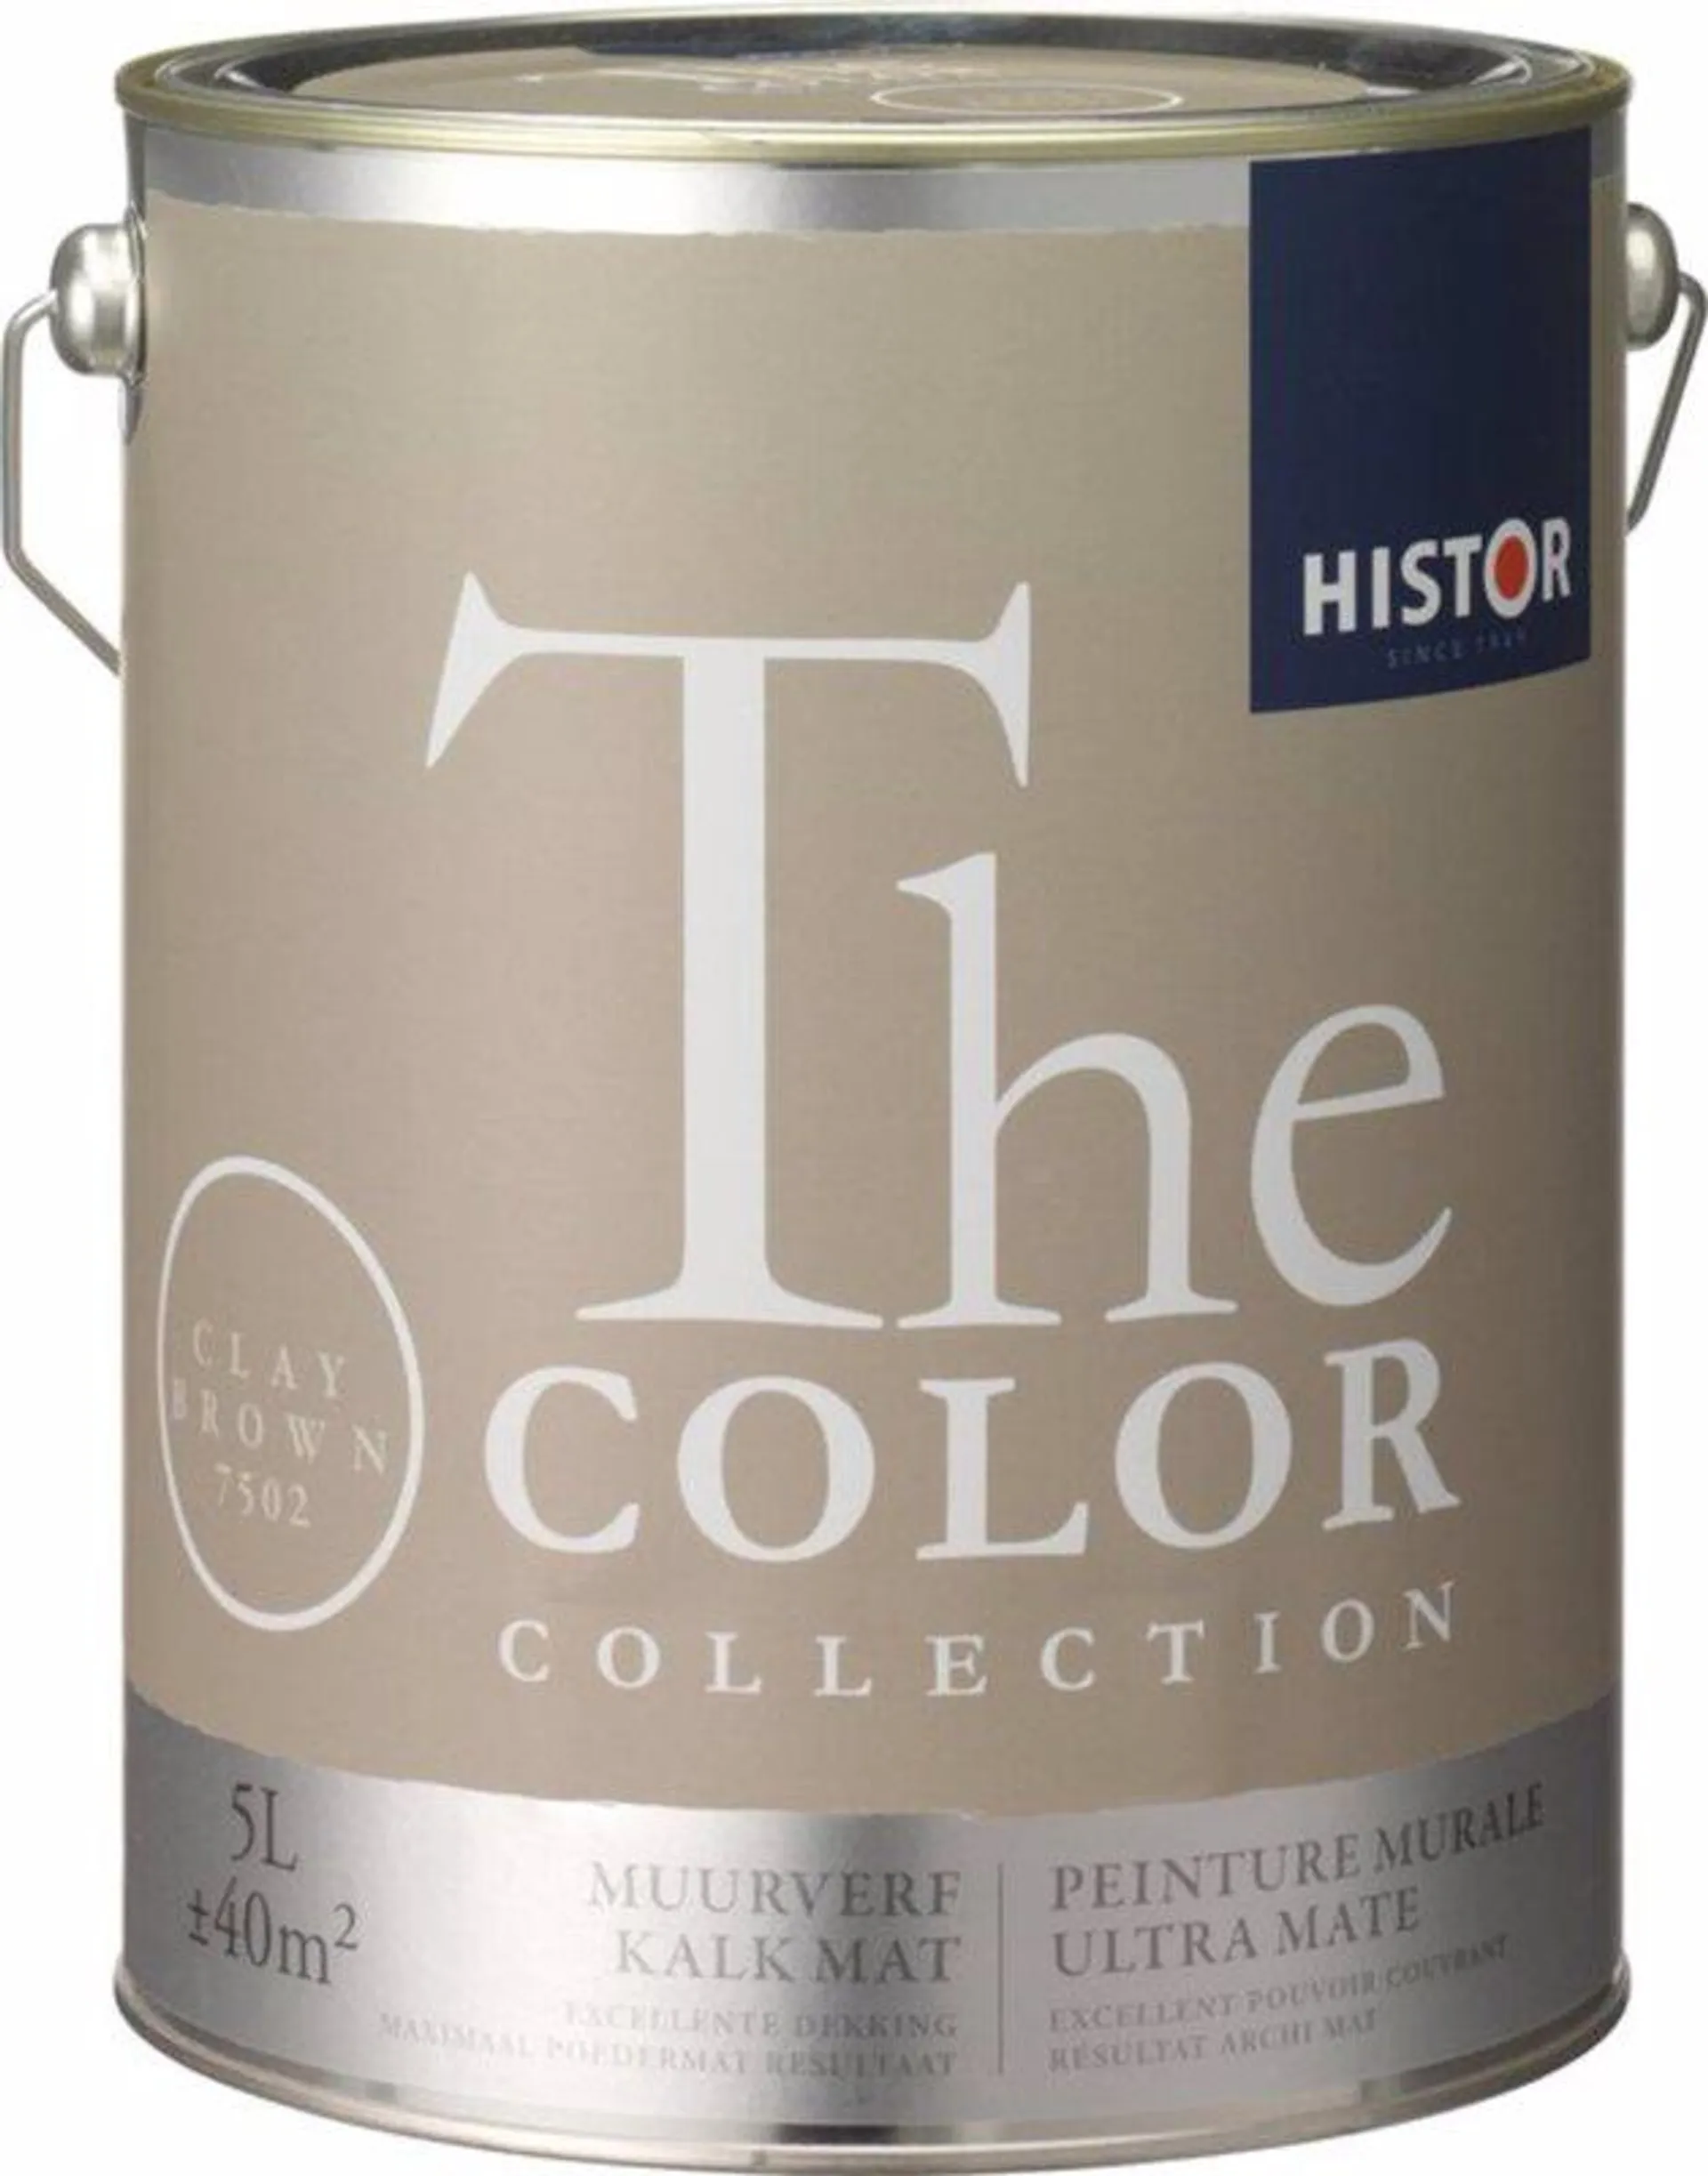 Histor The Color Collection Muurverf Clay Brown 7502